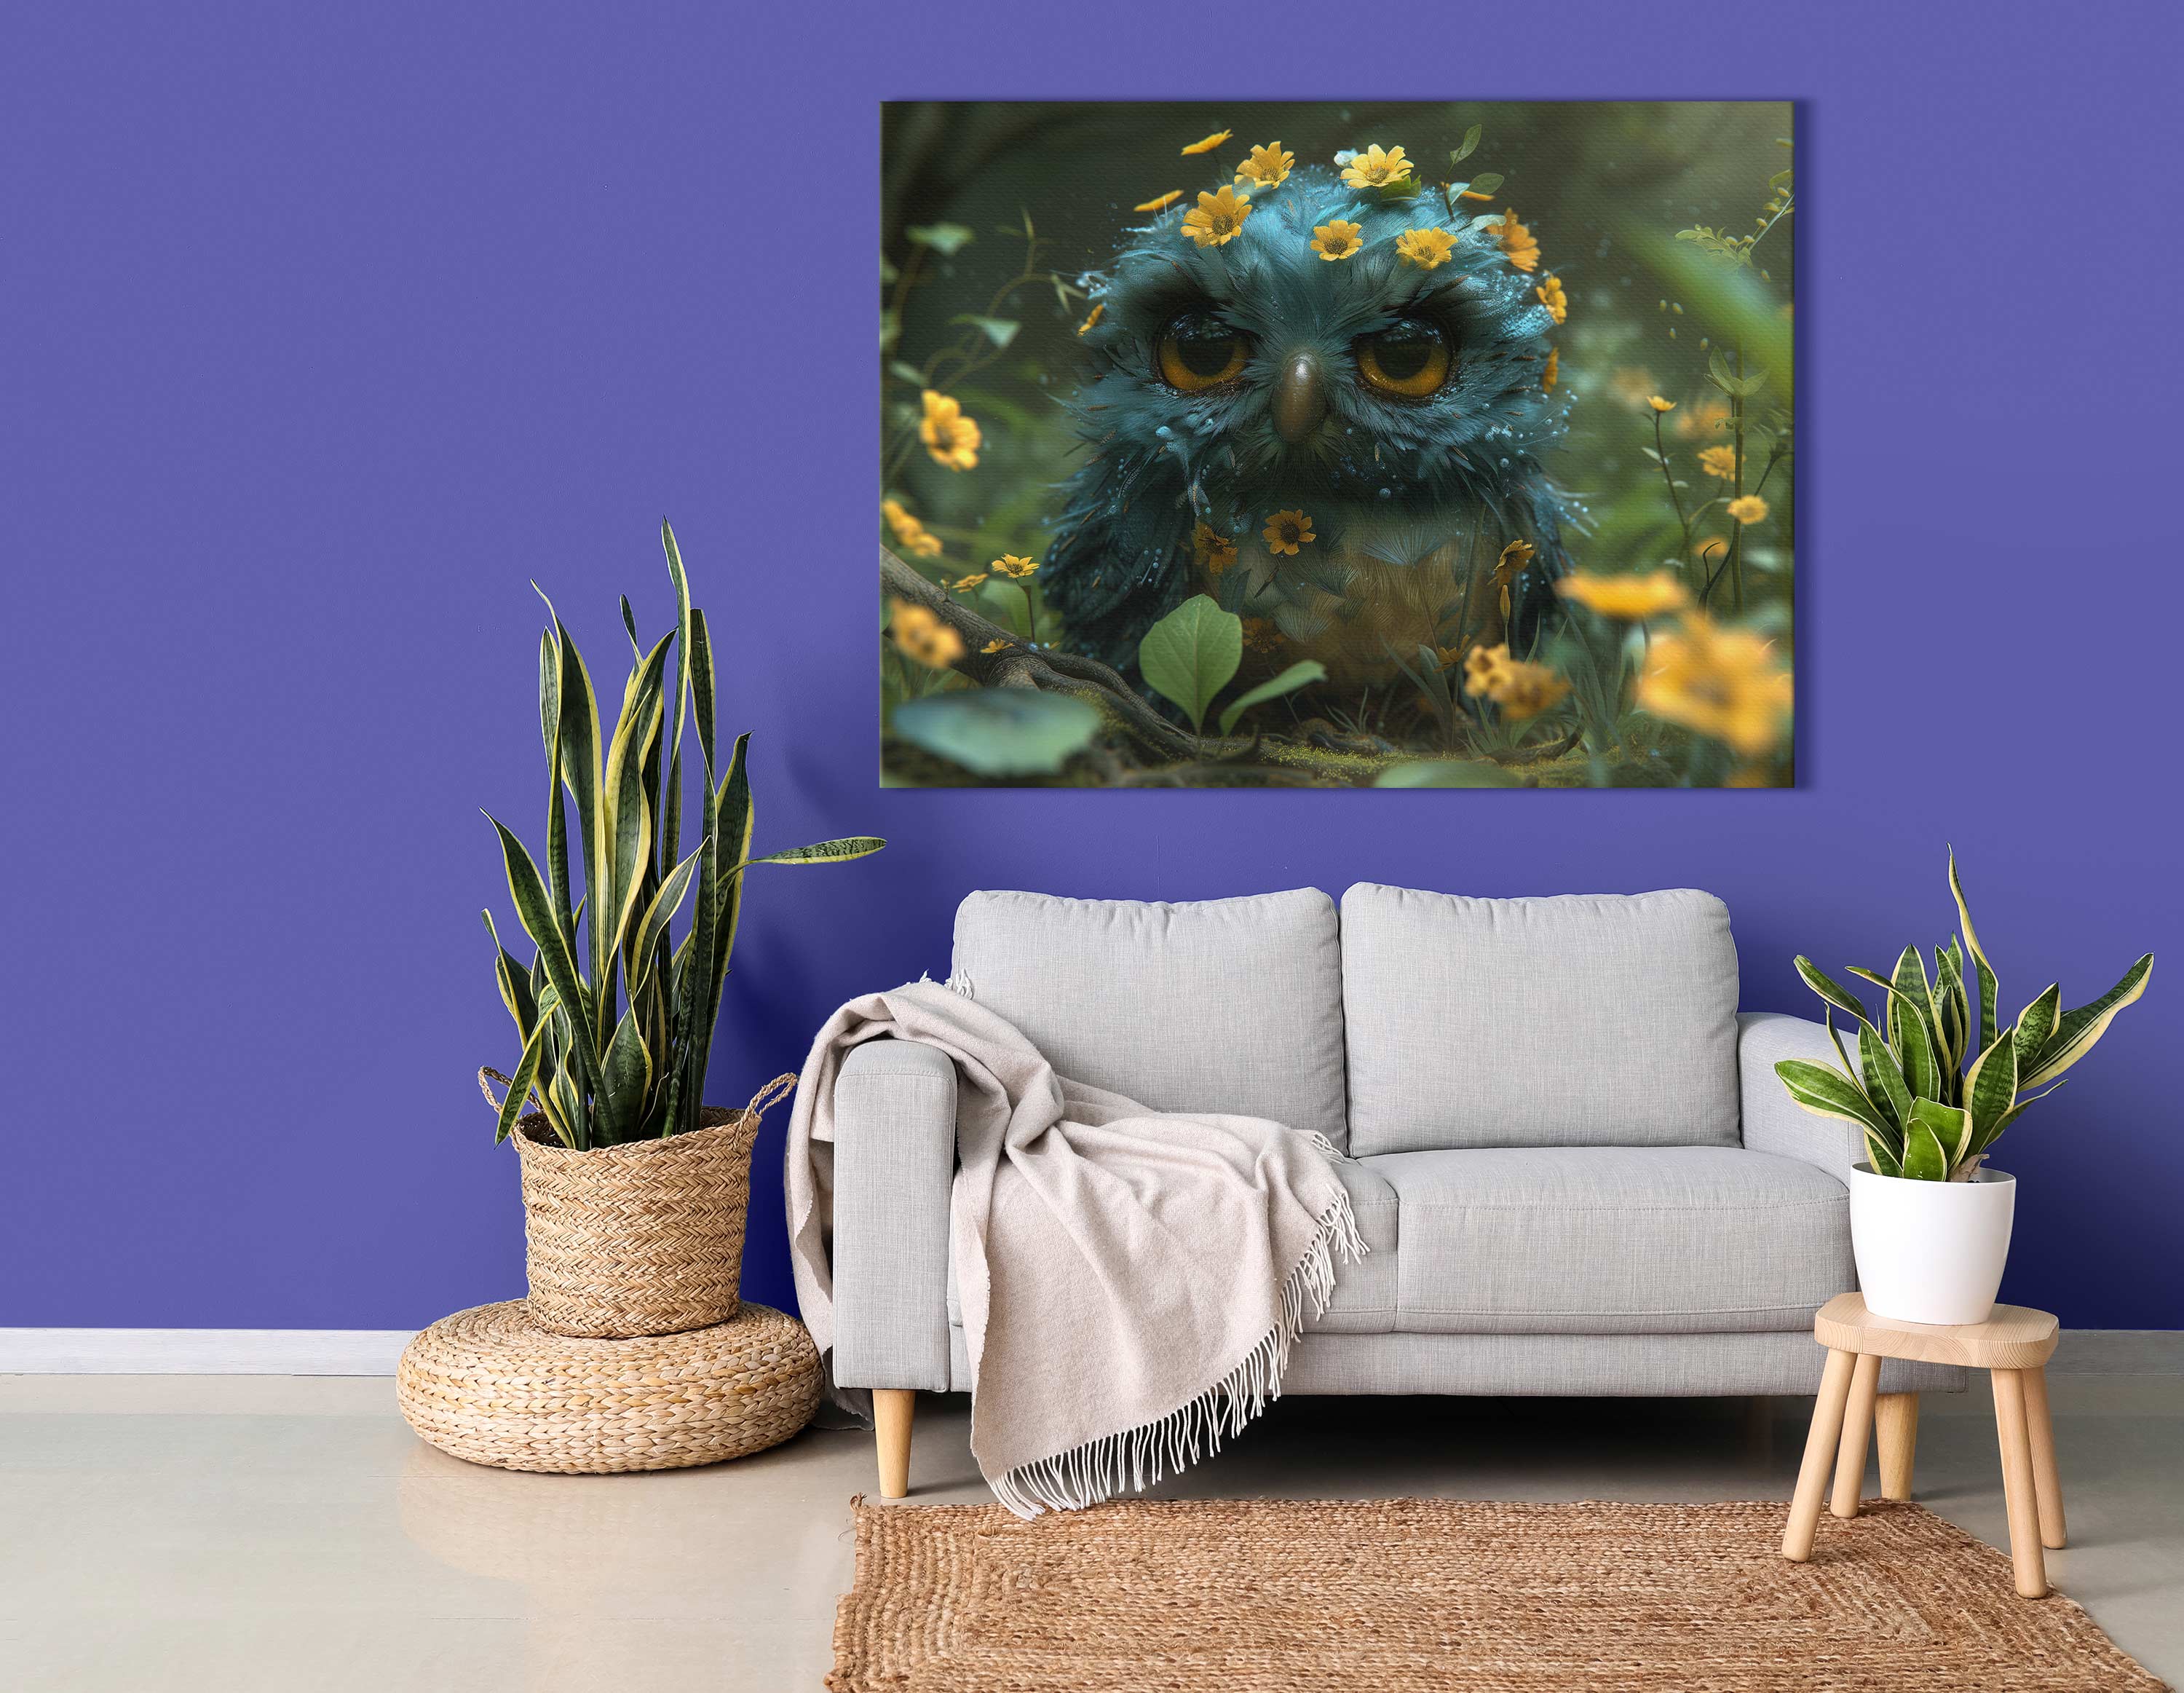   Blue Owl with Flowers Canvas Art